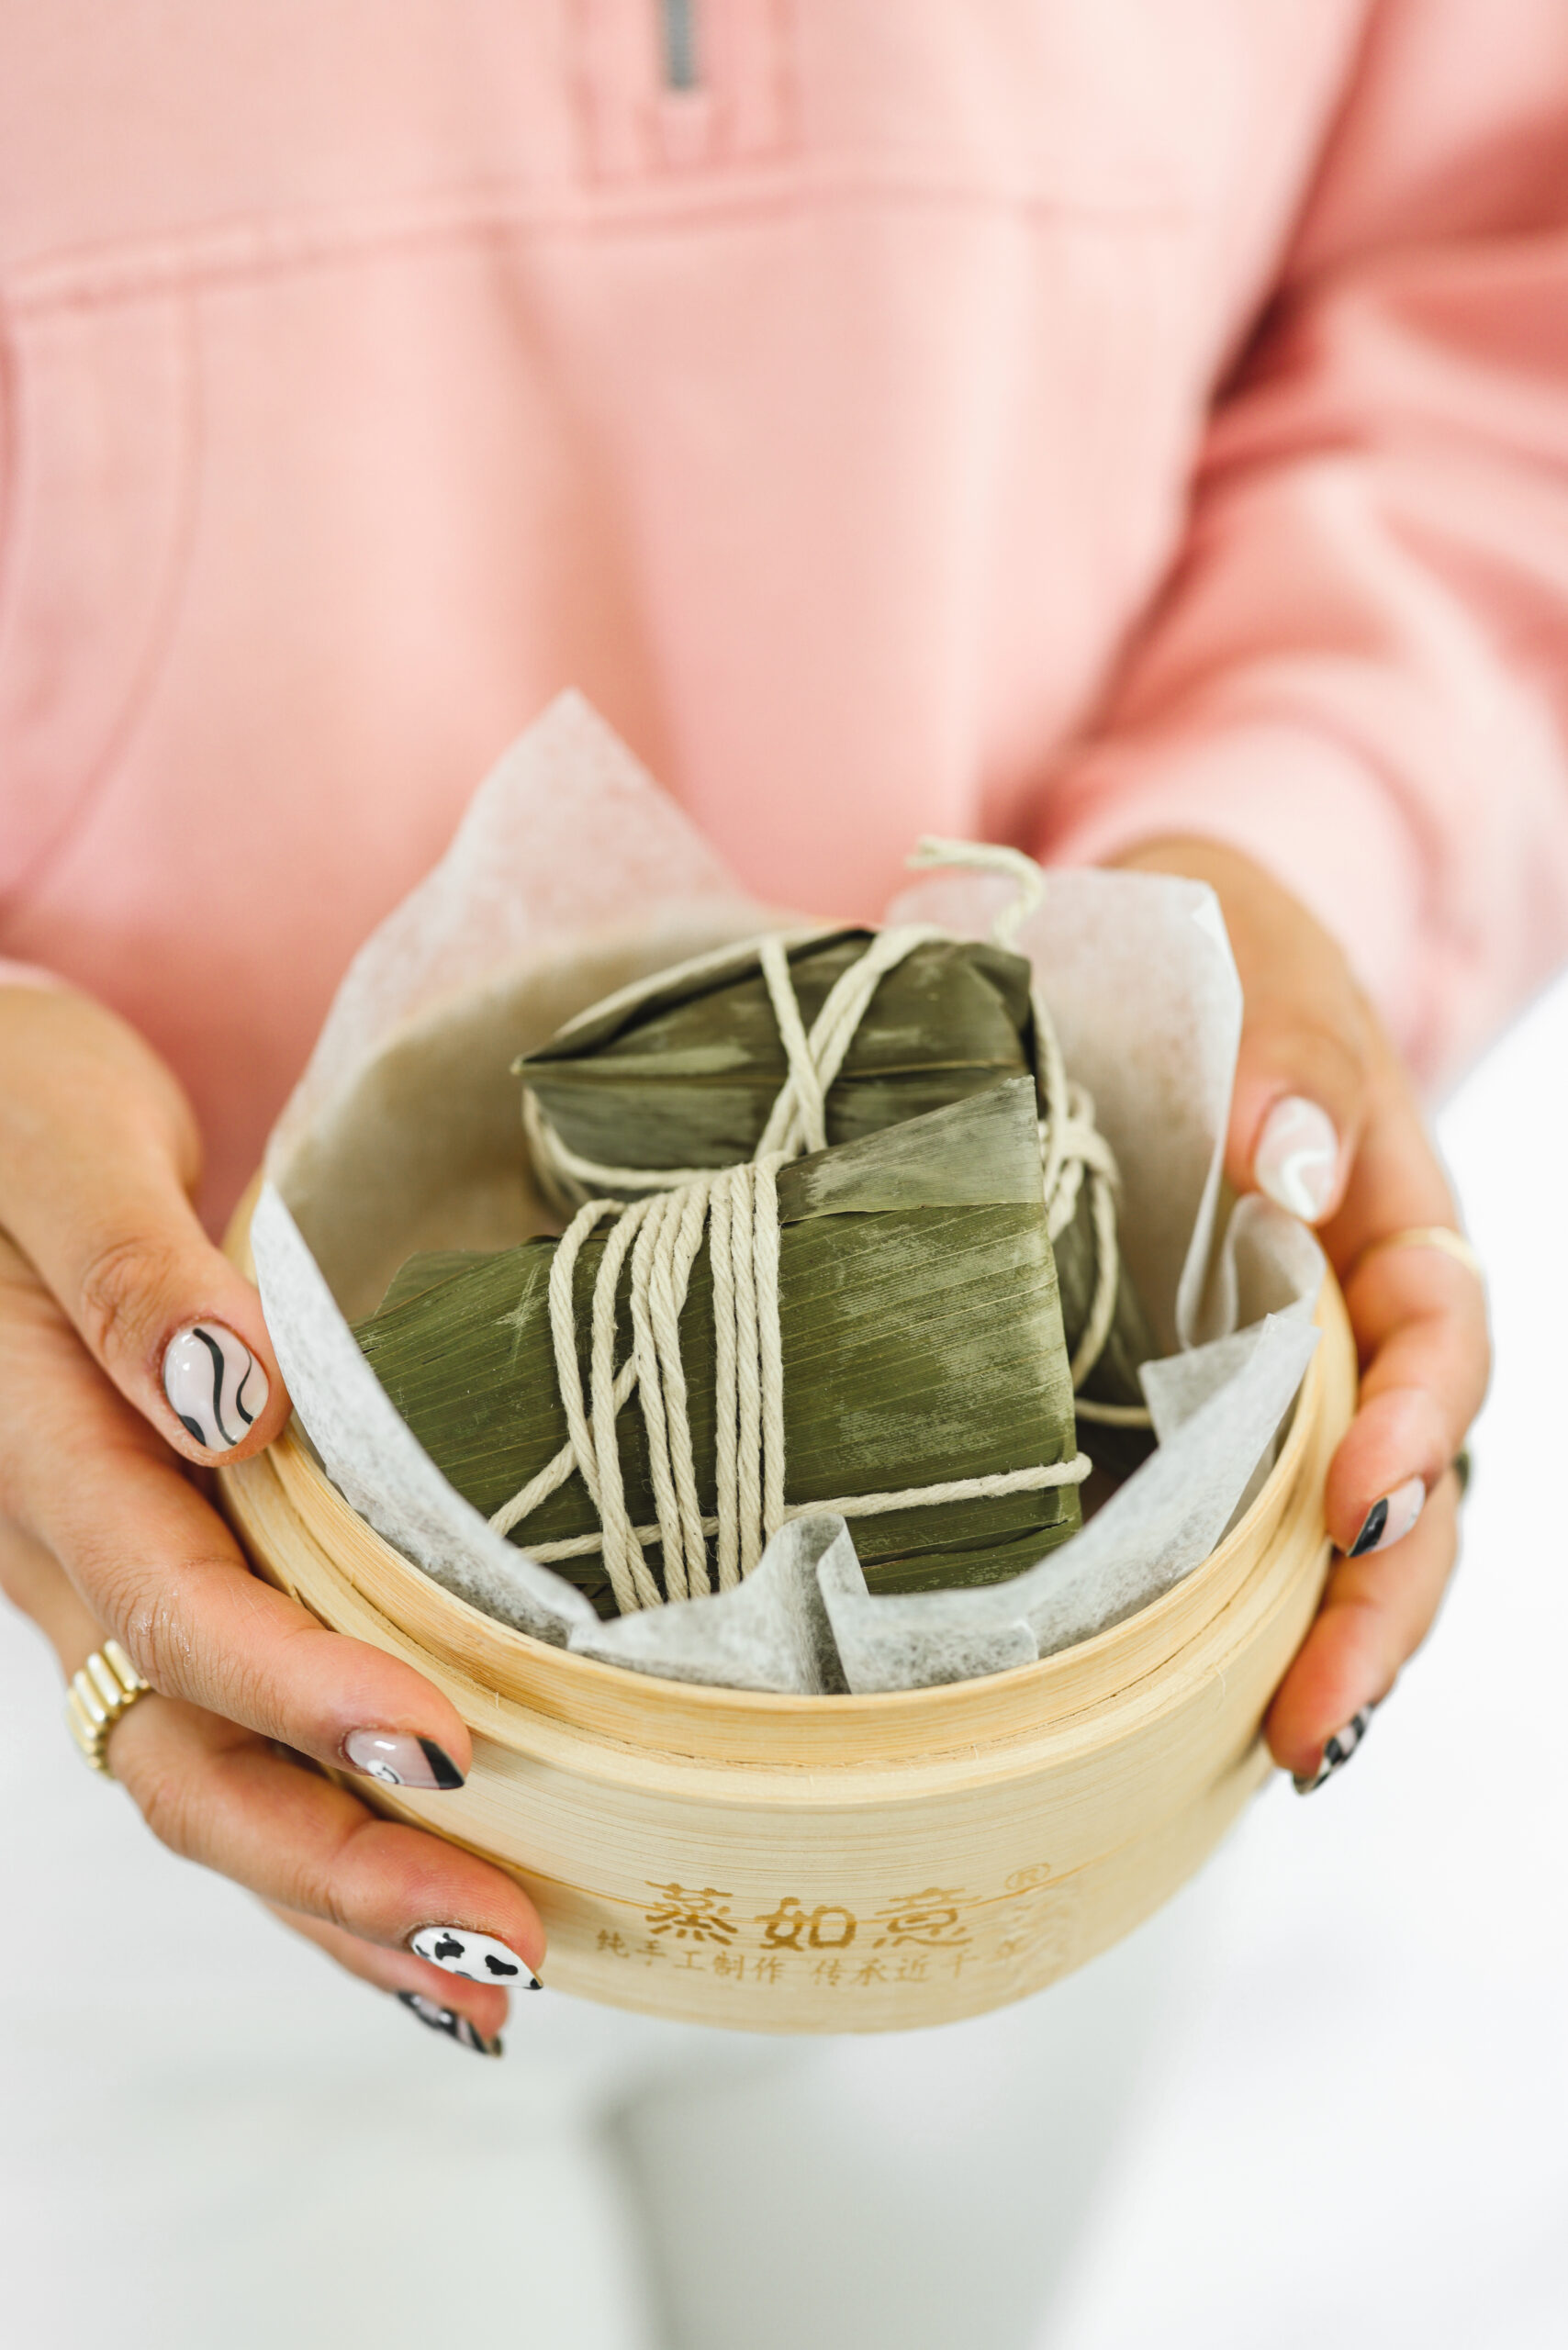 two hands holding a bowl filled with sticky rice dumplings tied in bamboo leaves. 